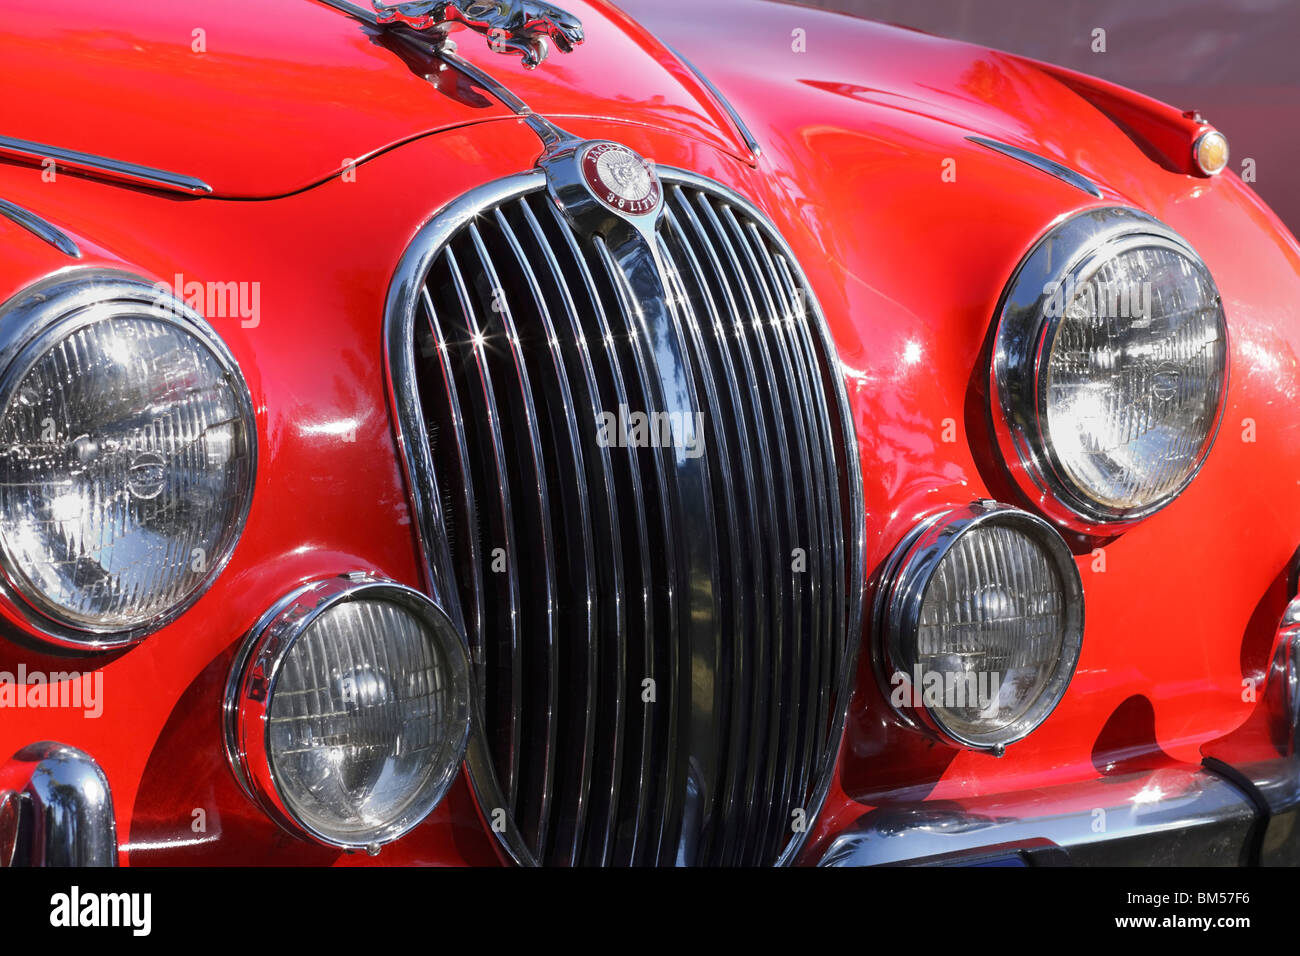 Close-up front view of a red Mark 2 3.8 litre Jaguar. Stock Photo